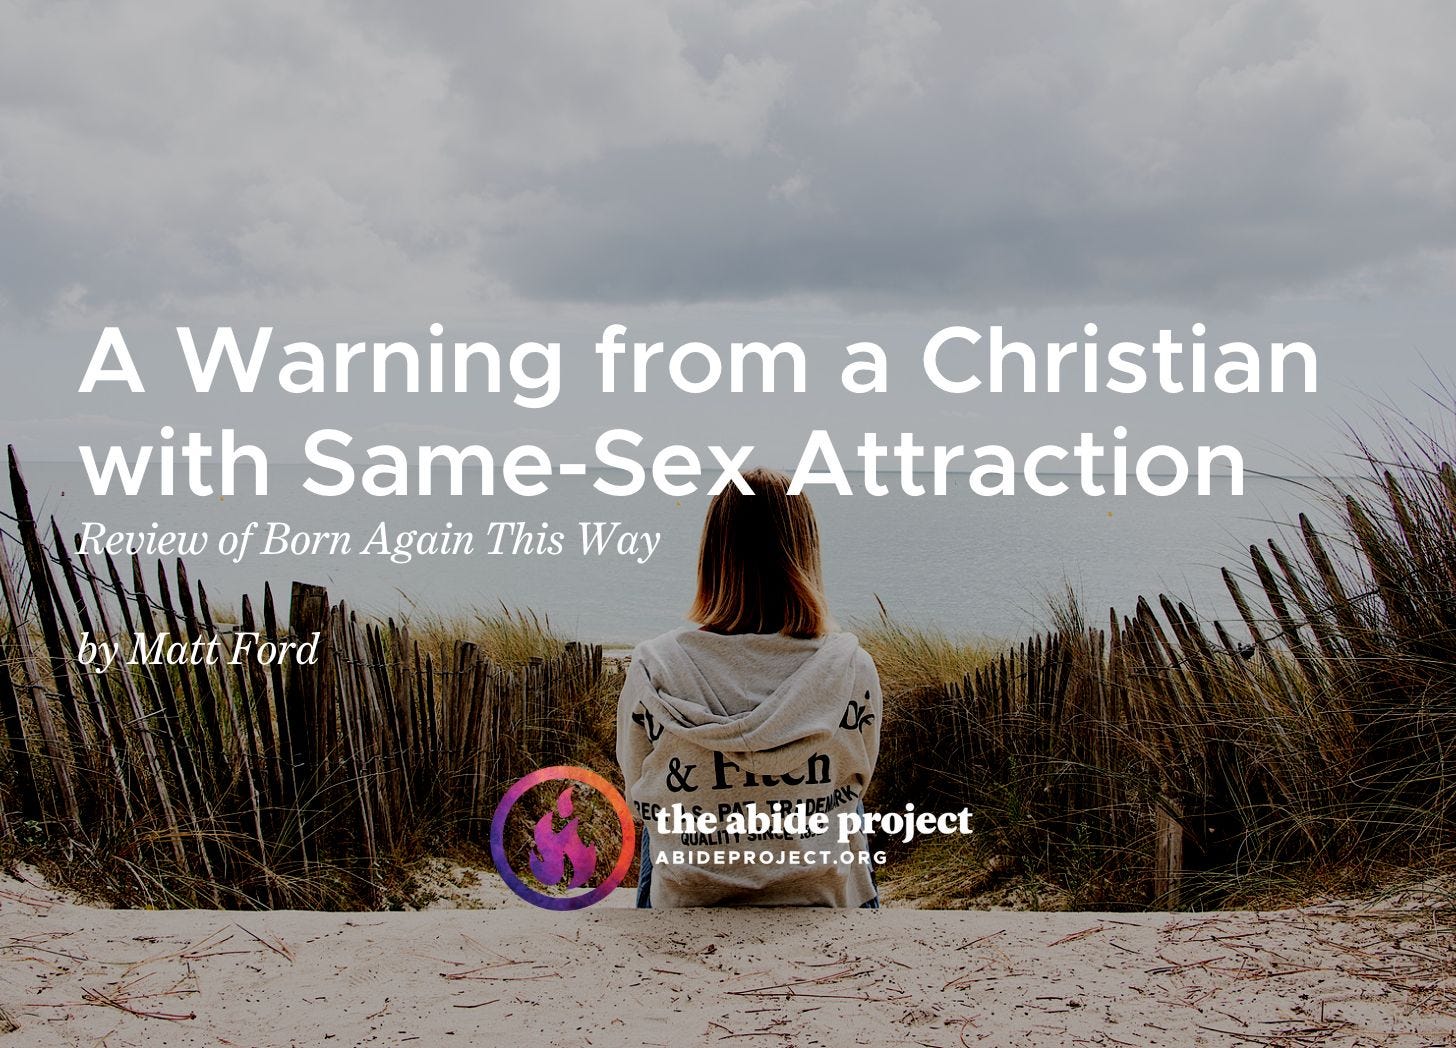 A Warning from a Christian with Same-Sex Attraction